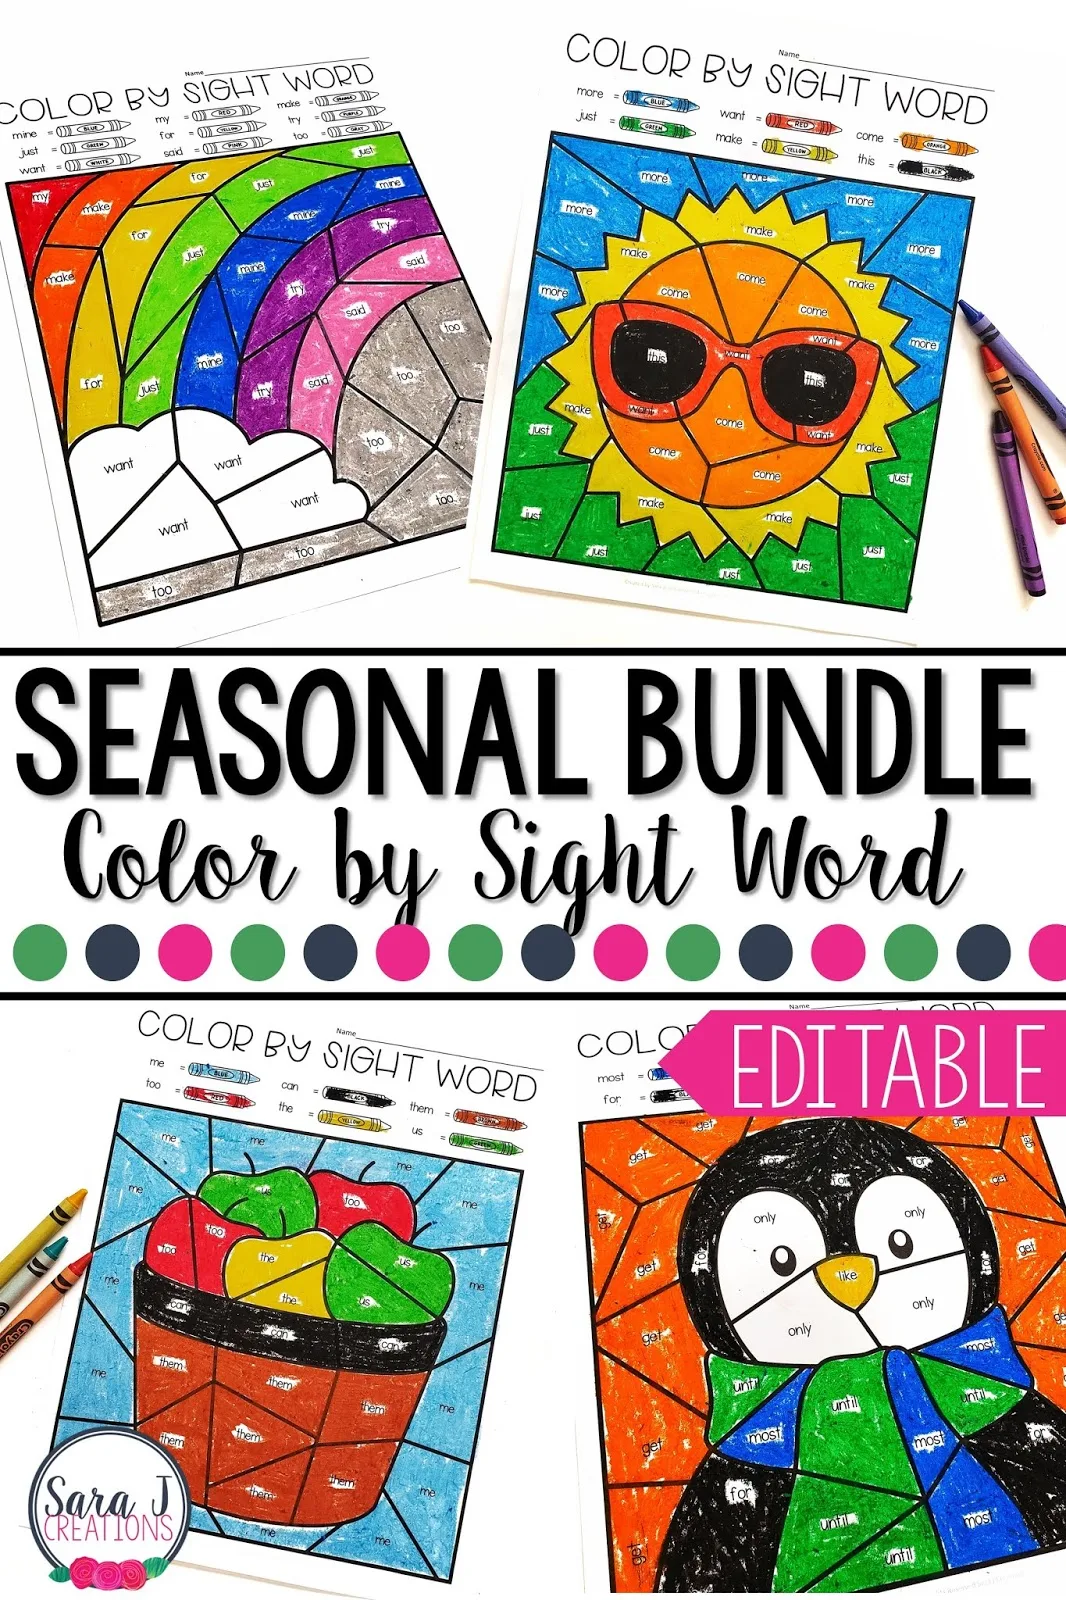 Editable Color by Sight Word Bundle!!!! Perfect for making sight word practice fun and meaningful for your students all year long. No matter what sight words your students are working on, you can create personalized coloring worksheets in a snap! Winter, spring, summer and fall coloring pages right at your fingertips.